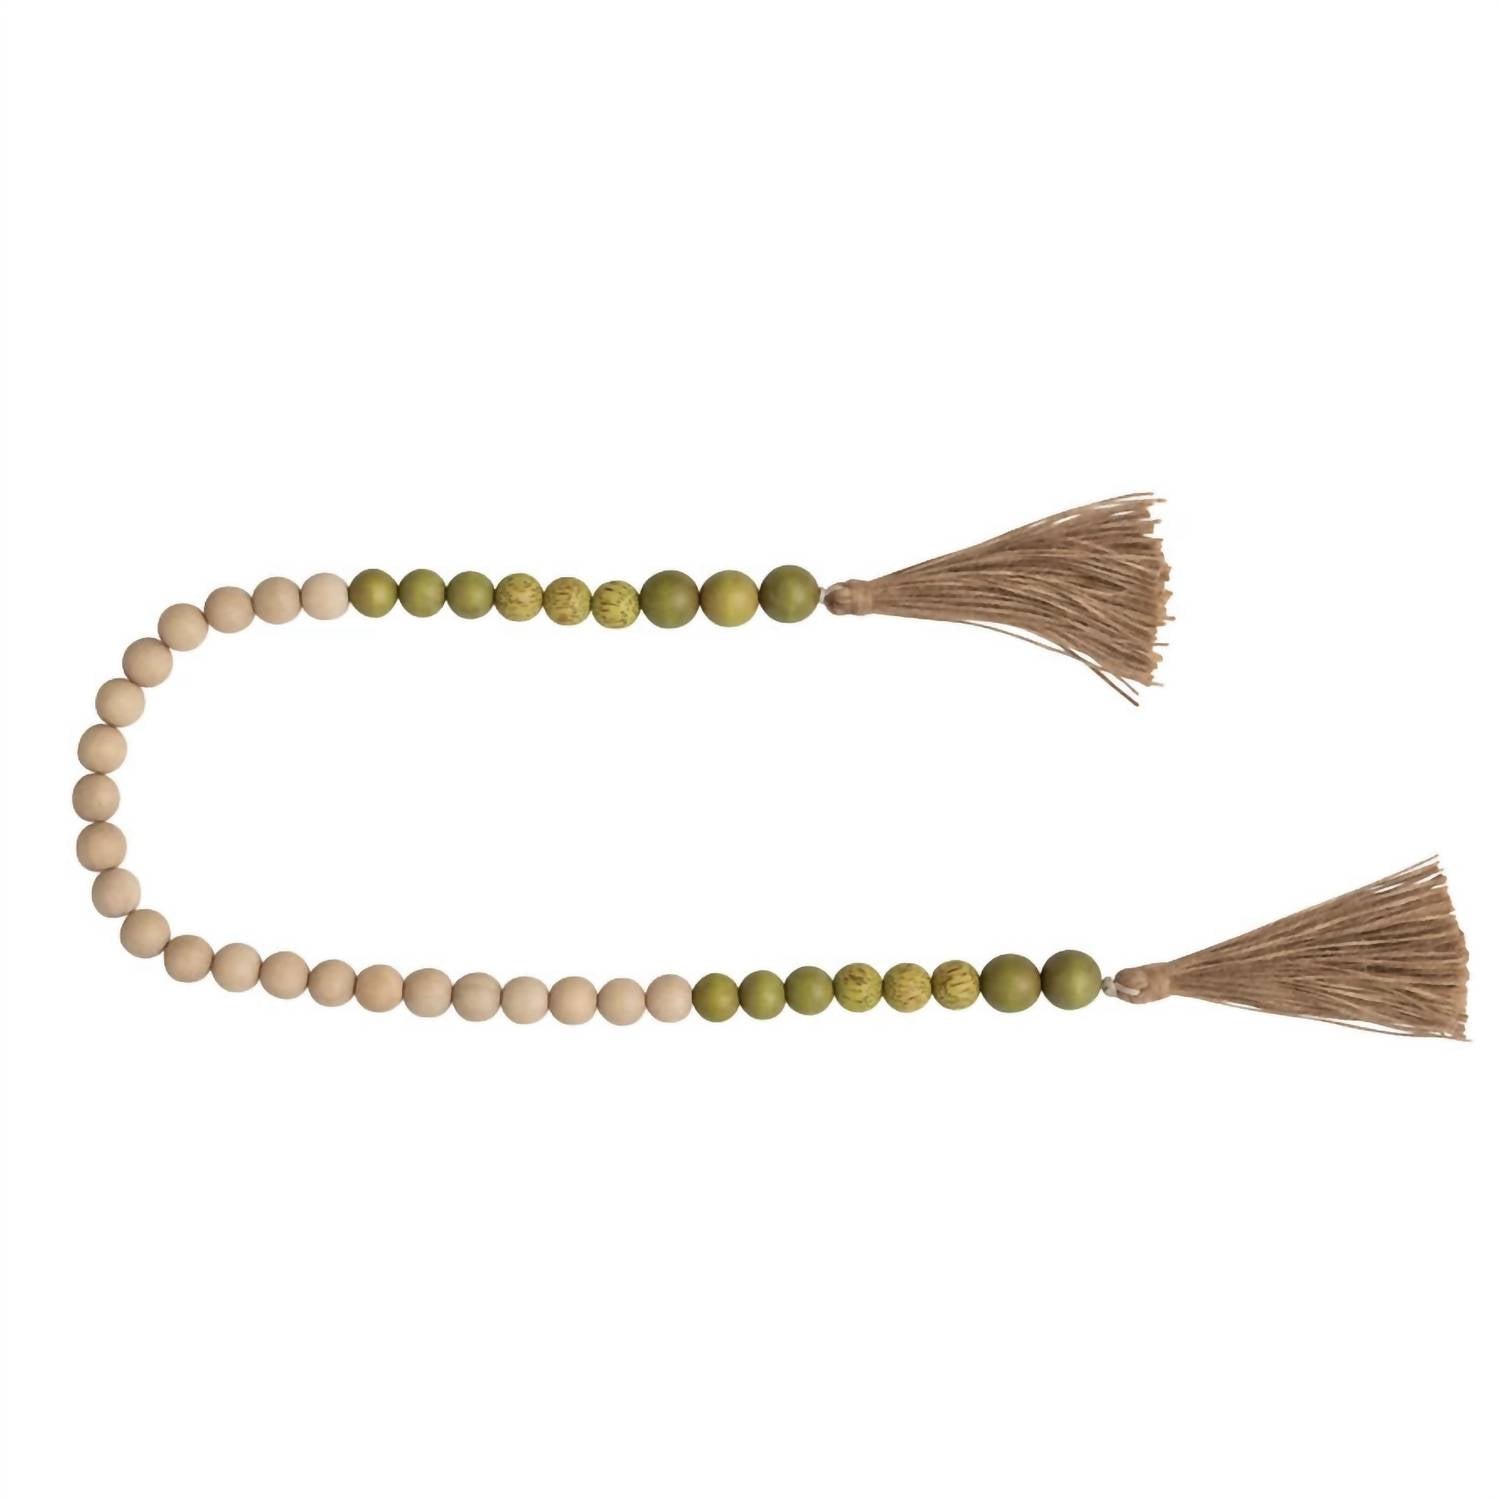 Shop Creative Co-op Wood And Coco Shell Bead Garland In Natural & Green